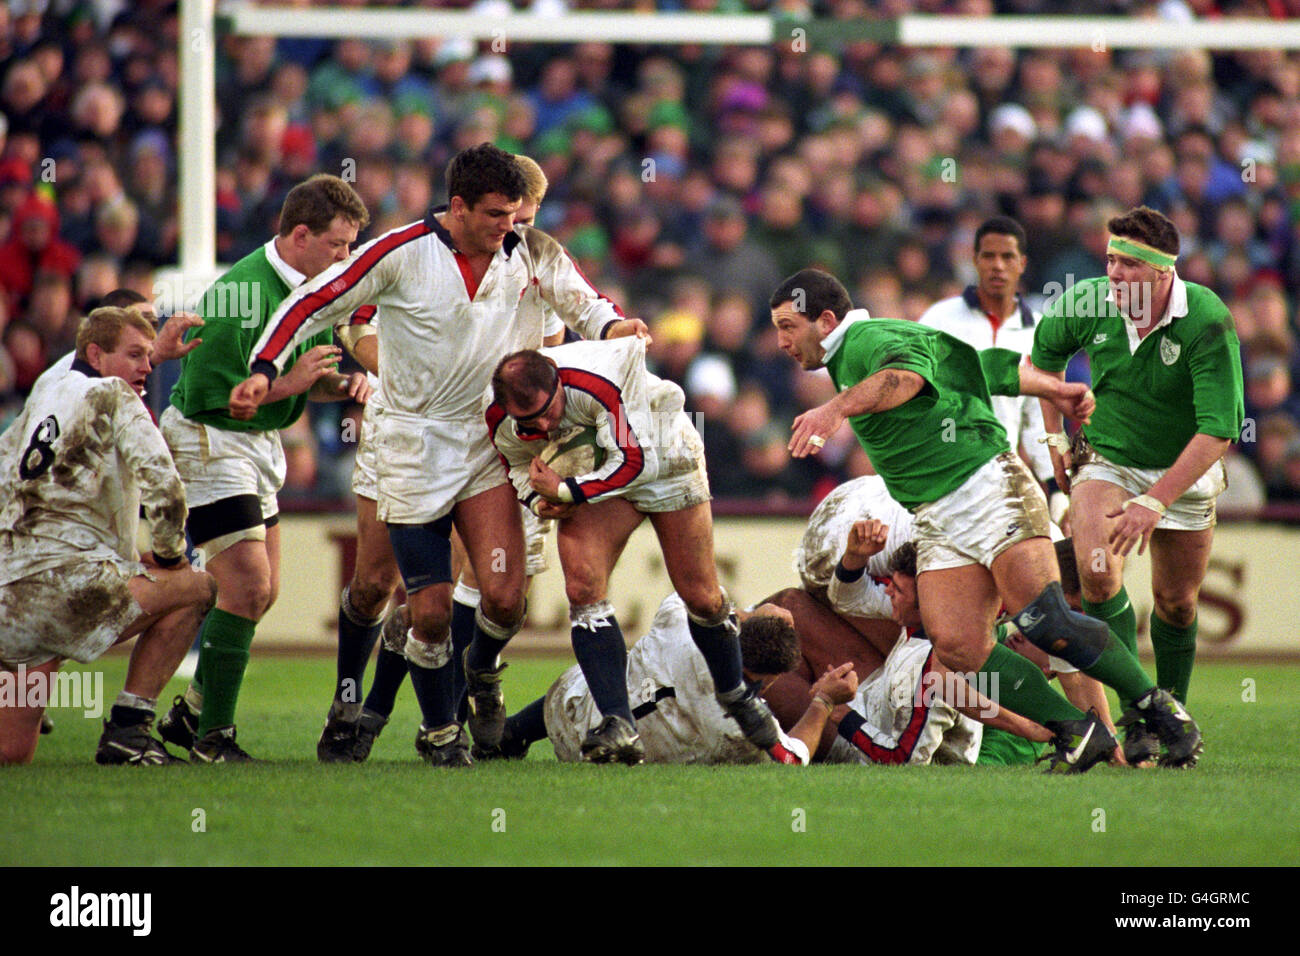 Rugby Union - Five Nations Championship - Ireland v England. England's Martin Johnson (c) helps Brian Moore (with ball) Stock Photo